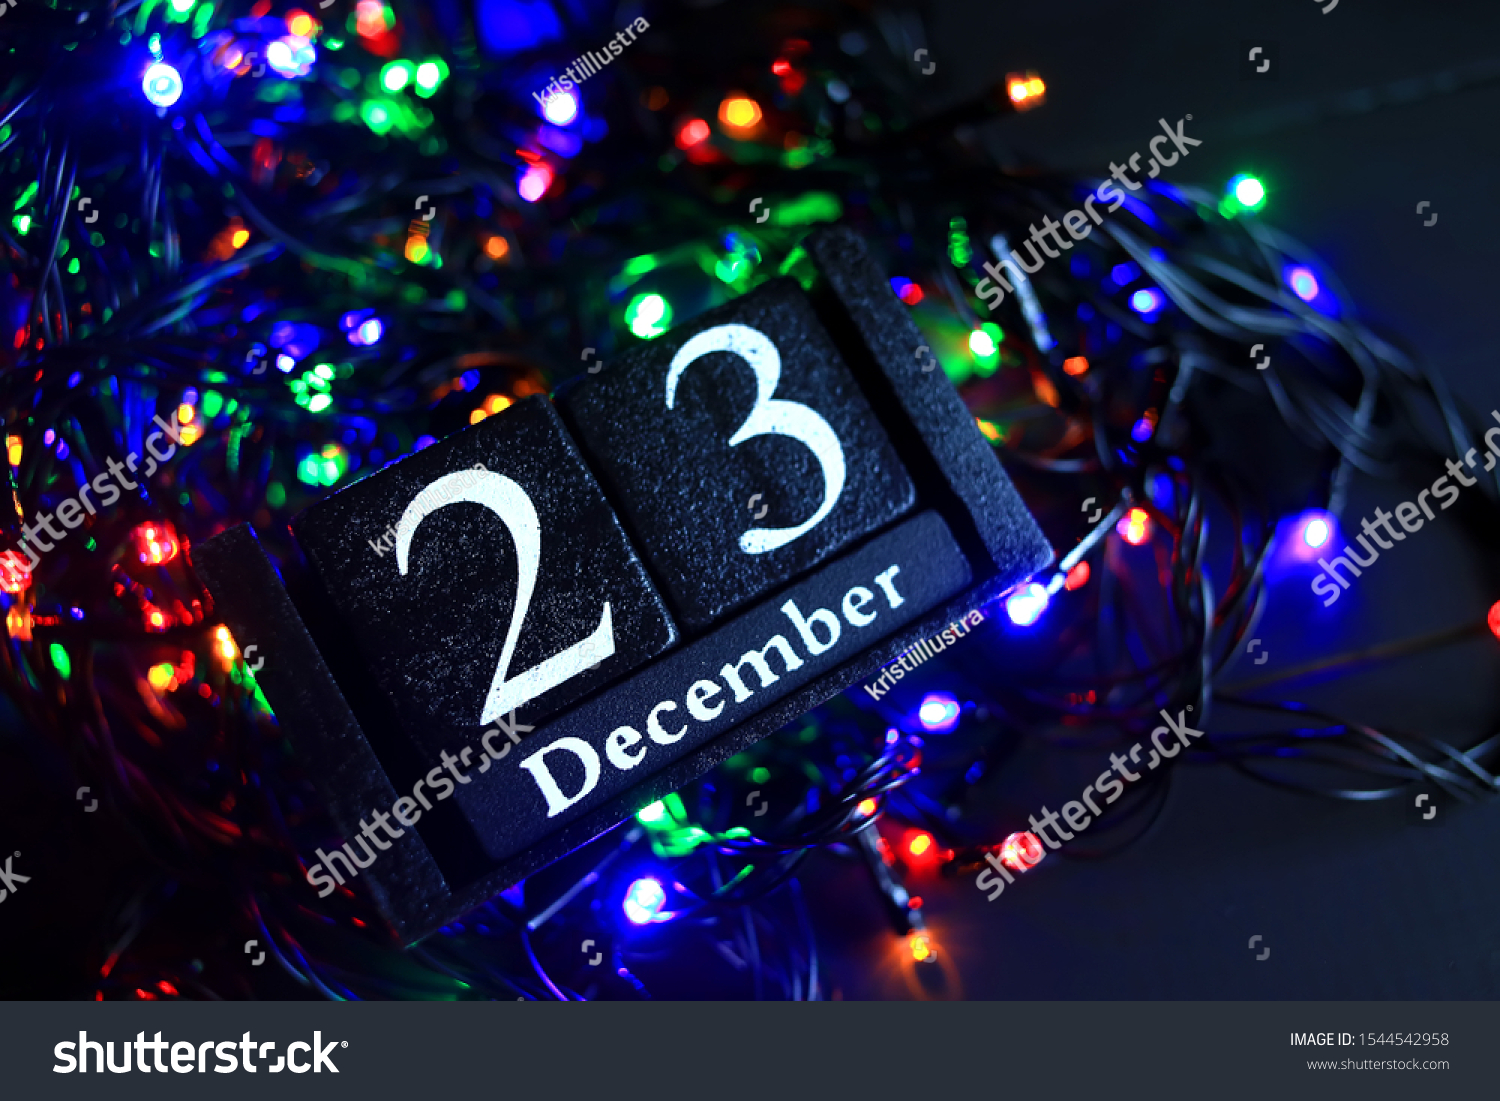 December 23, December twenty third. New year composition. Holiday concept New Year greeting card. #1544542958